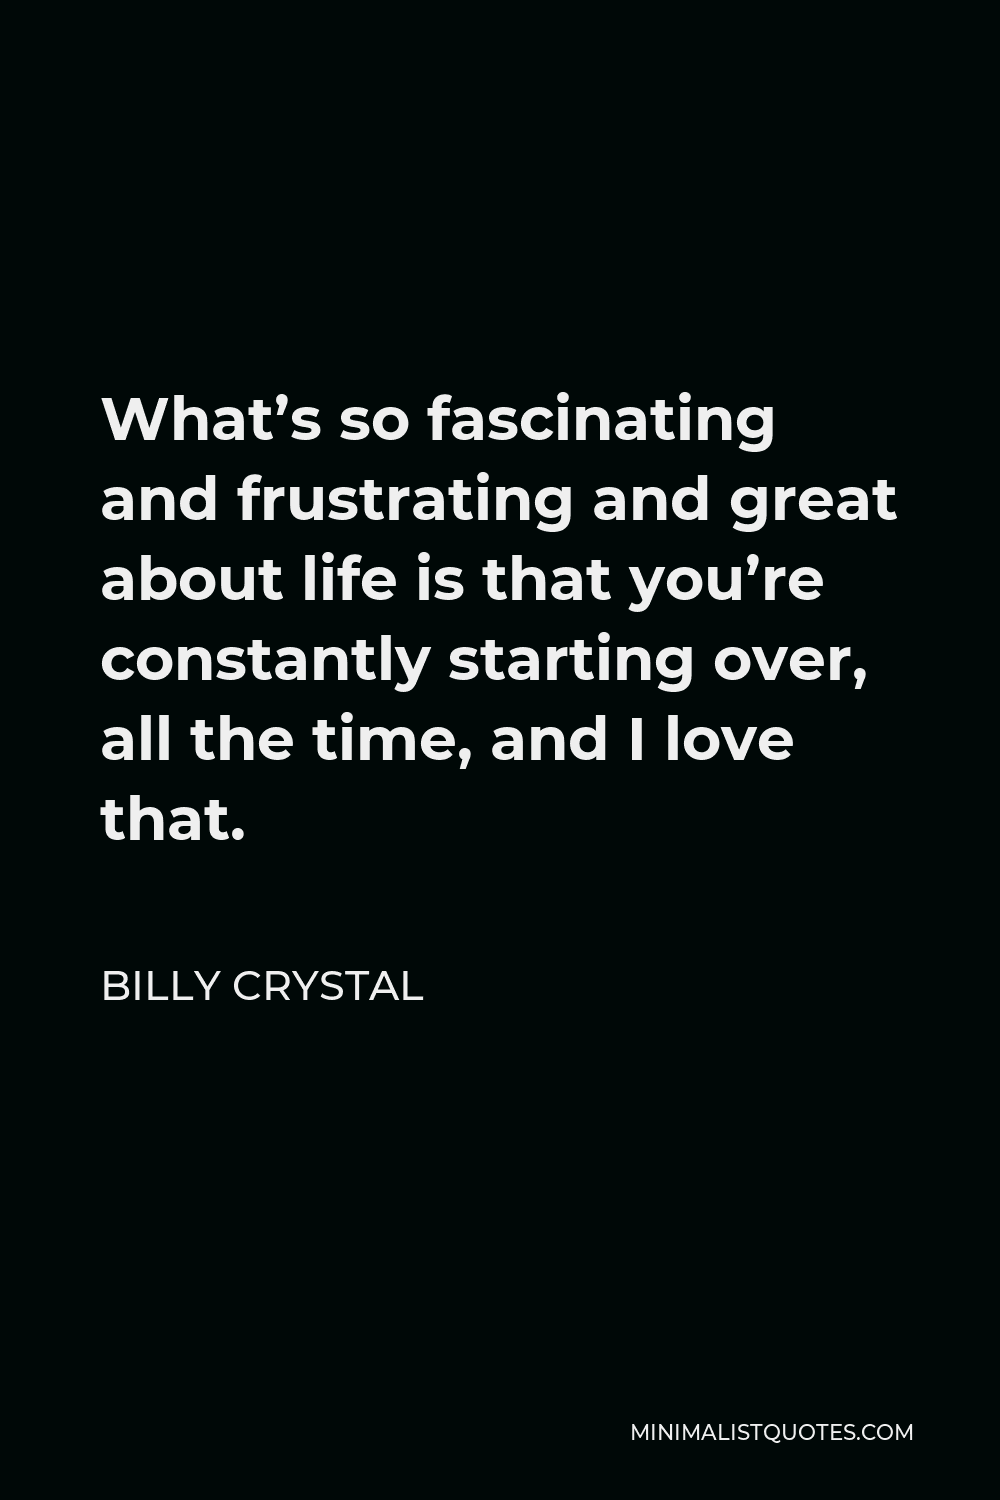 Billy Crystal Quote - What’s so fascinating and frustrating and great about life is that you’re constantly starting over, all the time, and I love that.